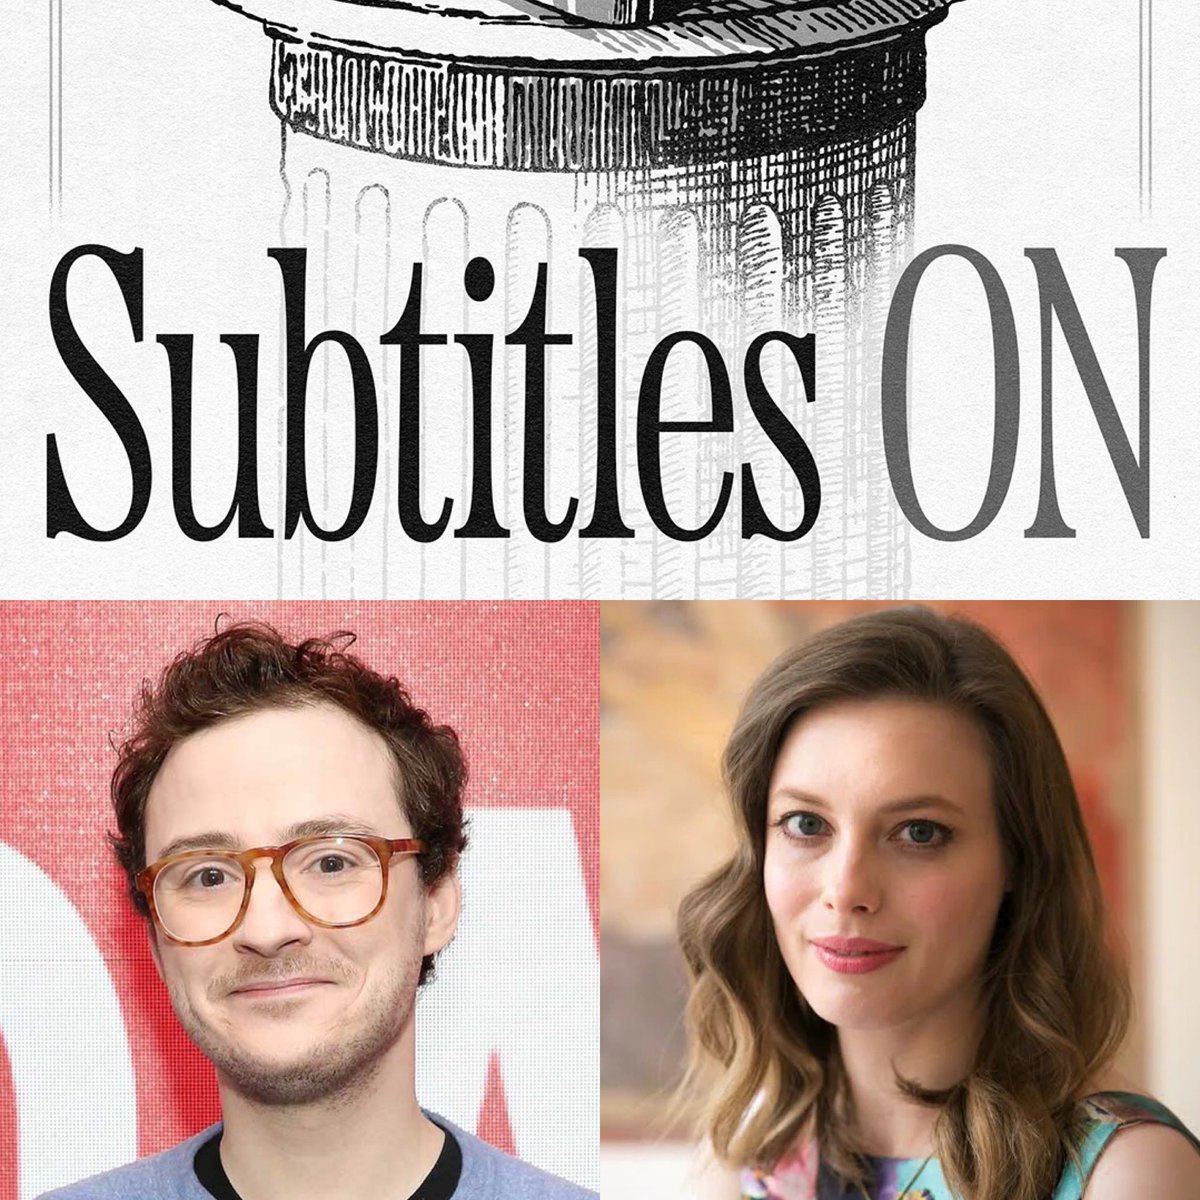 Today’s episode of Subtitles ON is unlocked for all! Sean talks to Gillian Jacobs and Griffin Newman @GriffLightning about the movie Opening Night. Watch: bit.ly/3F7FasD Listen: apple.co/3FaDQFq